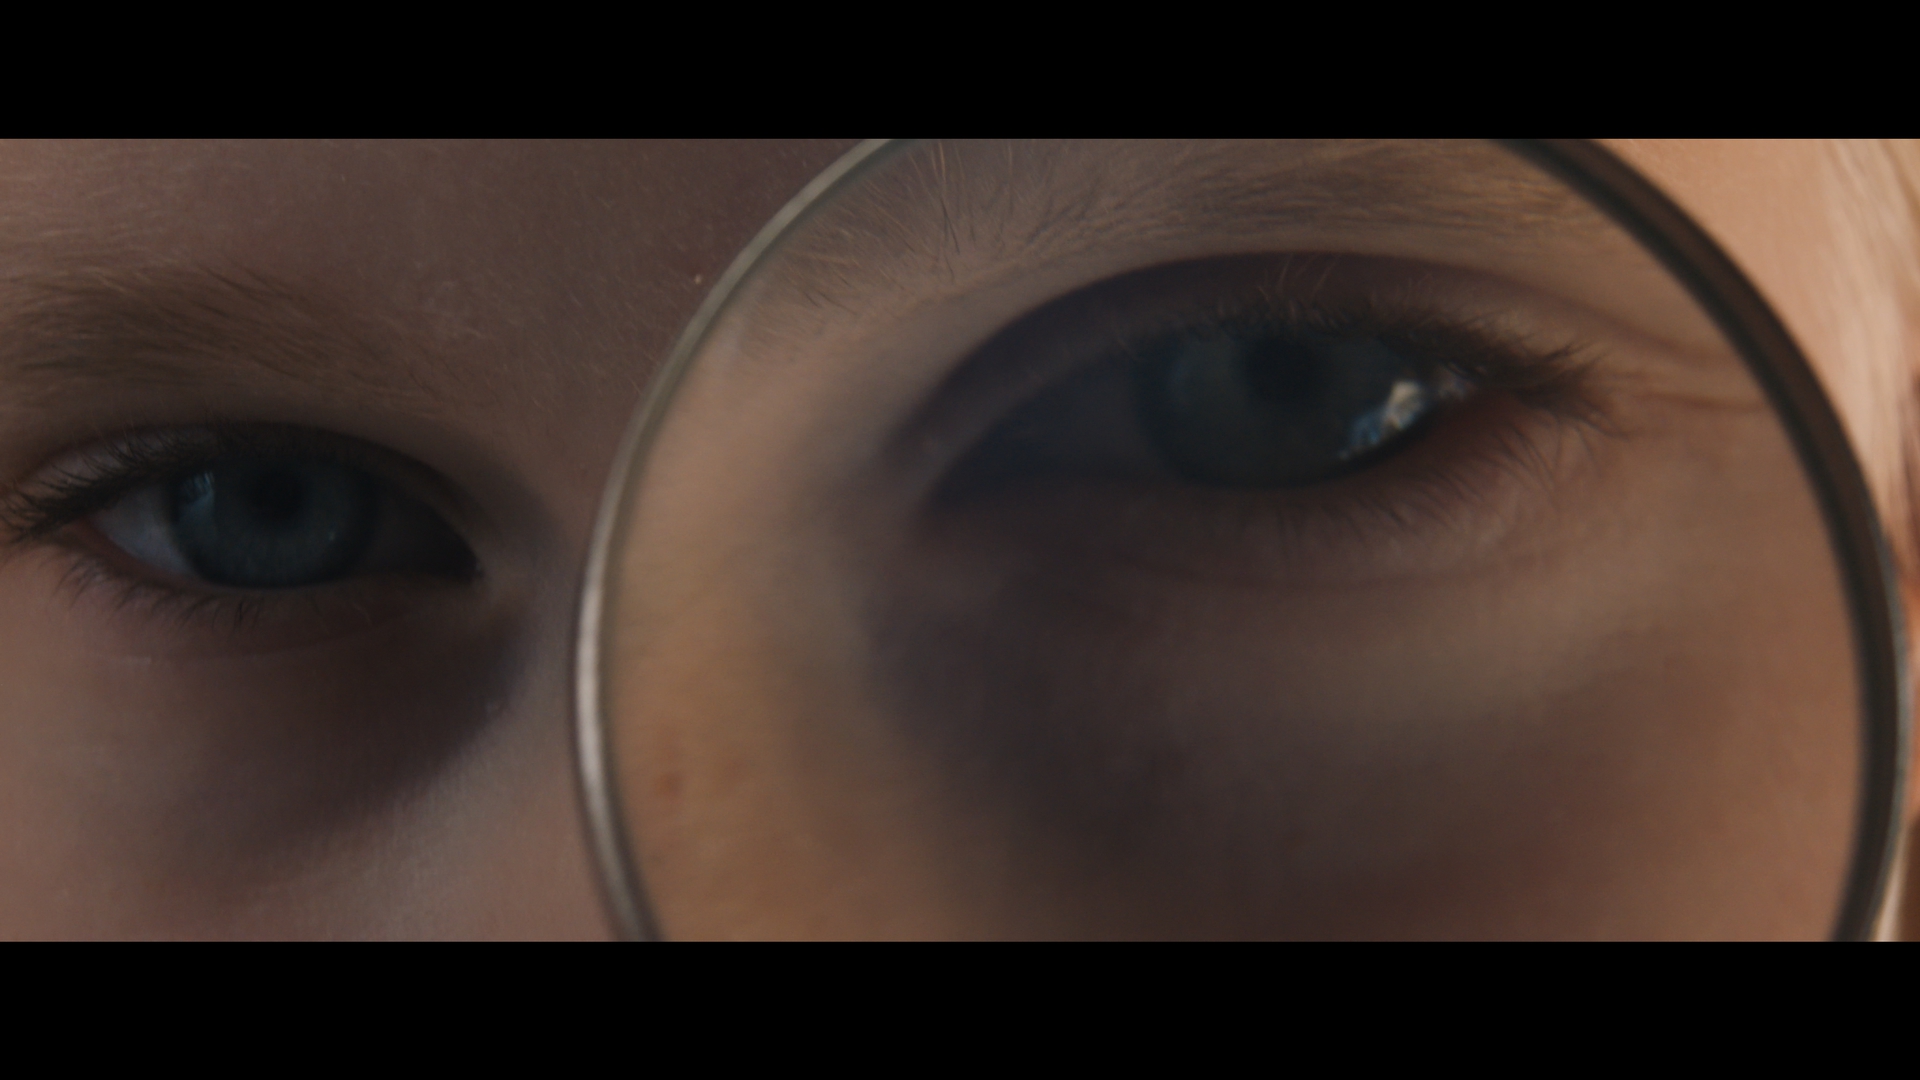 eszter galambos, Little detective is a short film directed by Abishek Singh. cinematographer: Eszter Galambos